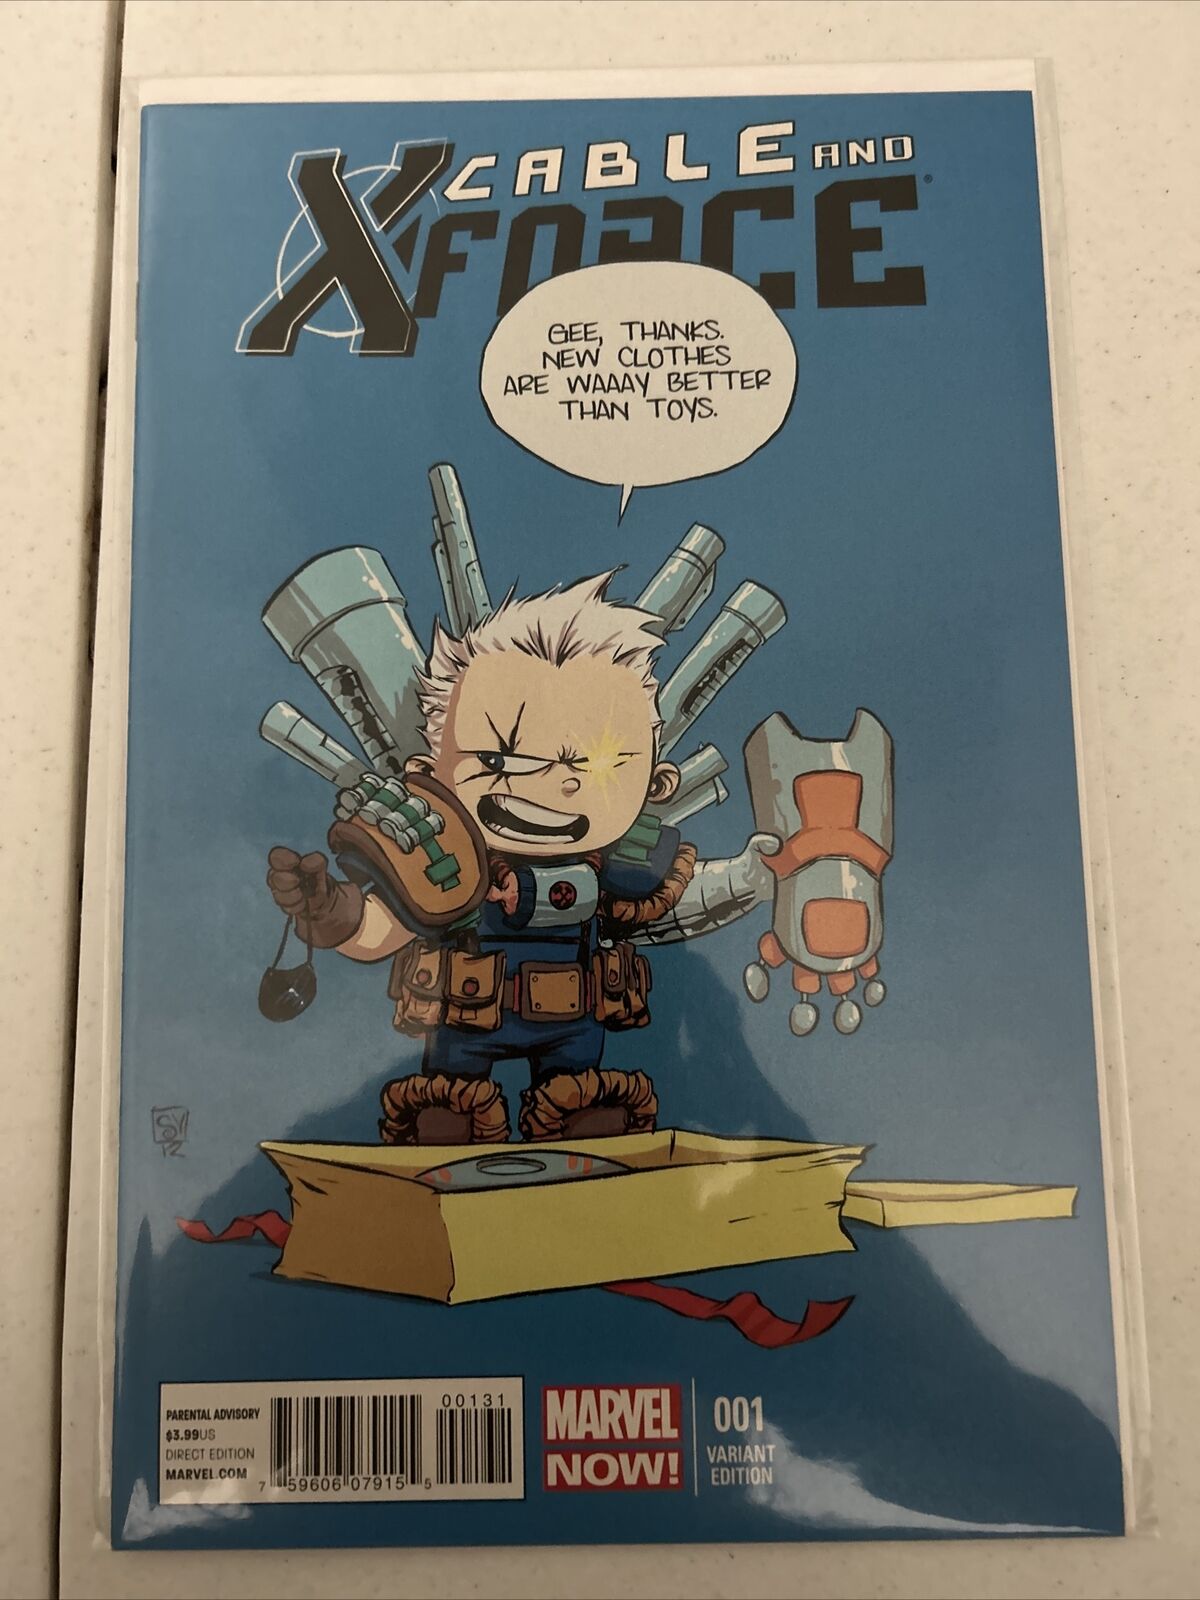 X-FORCE AND CABLE #1 SKOTTIE YOUNG VARIANT COVER ART RARE HTF